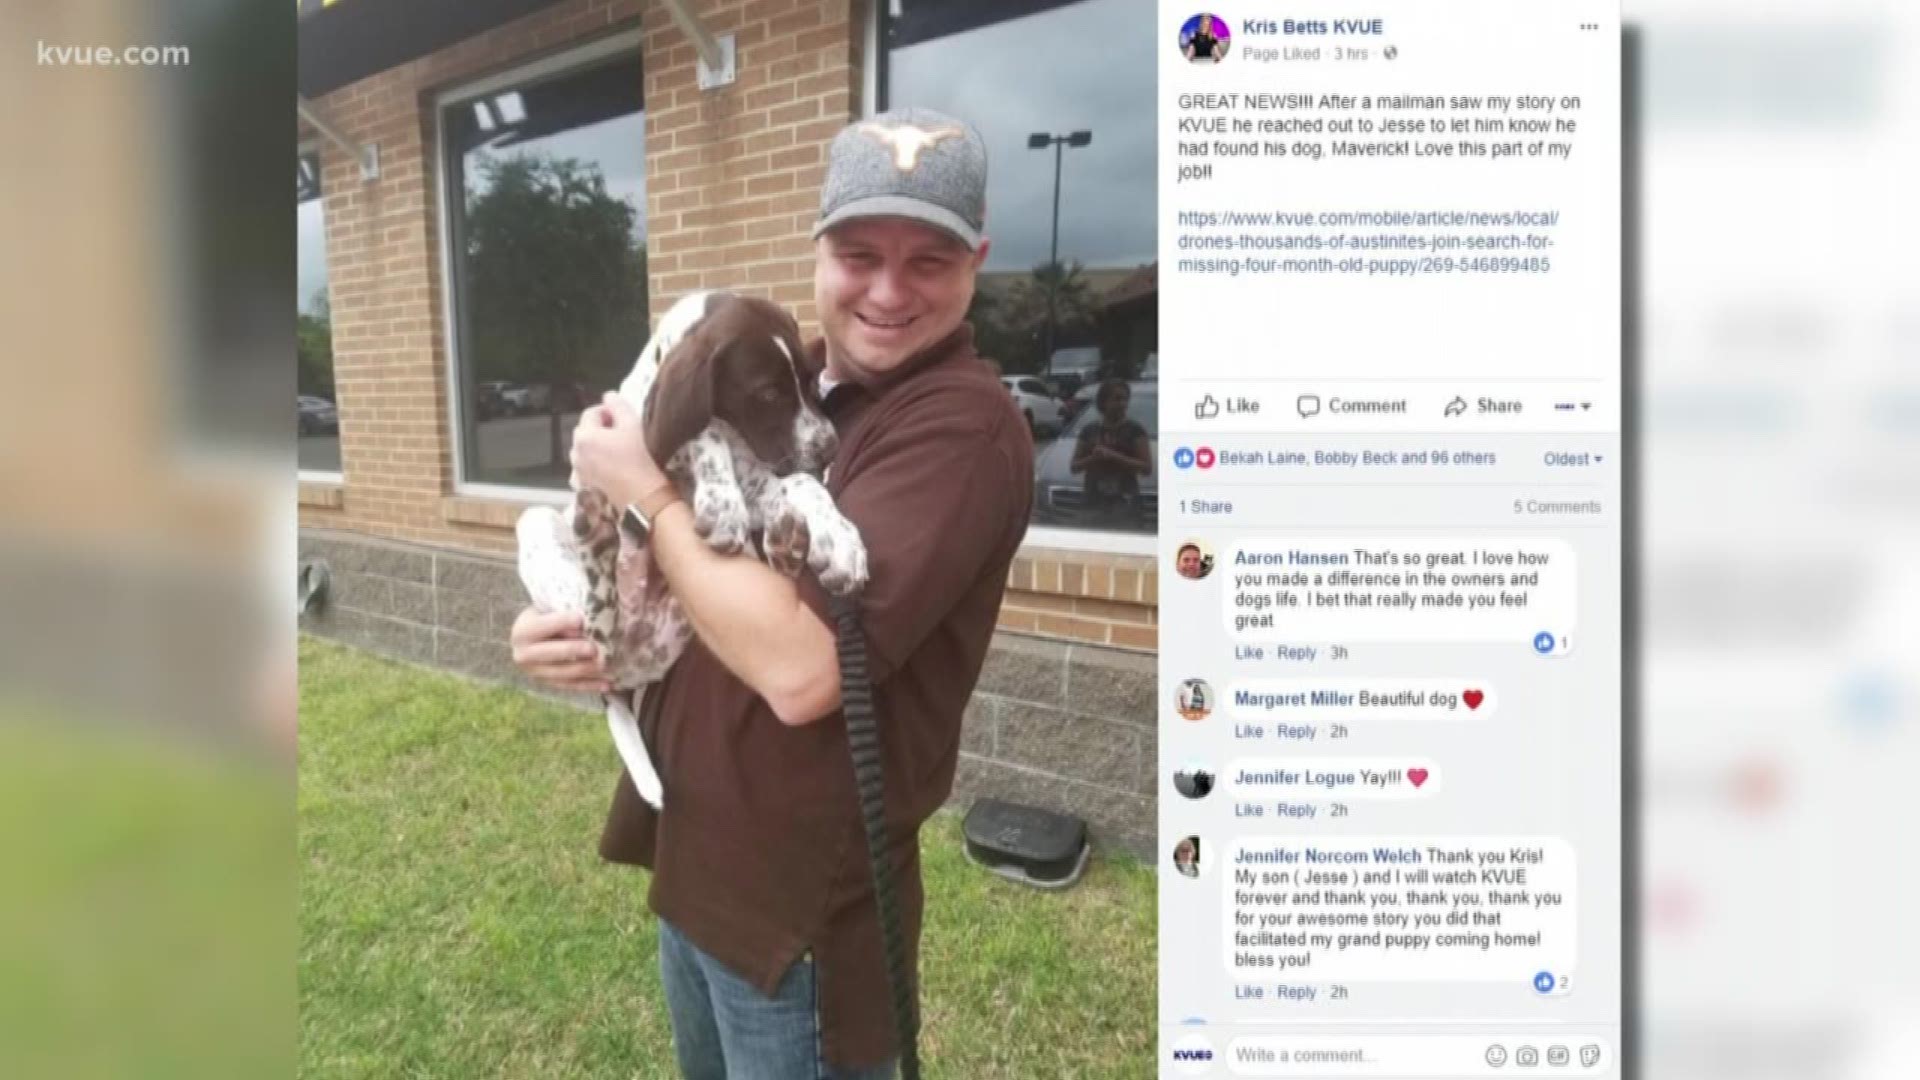 The four-month-old missing puppy that went viral on social media in Austin was reunited with his owner Tuesday.